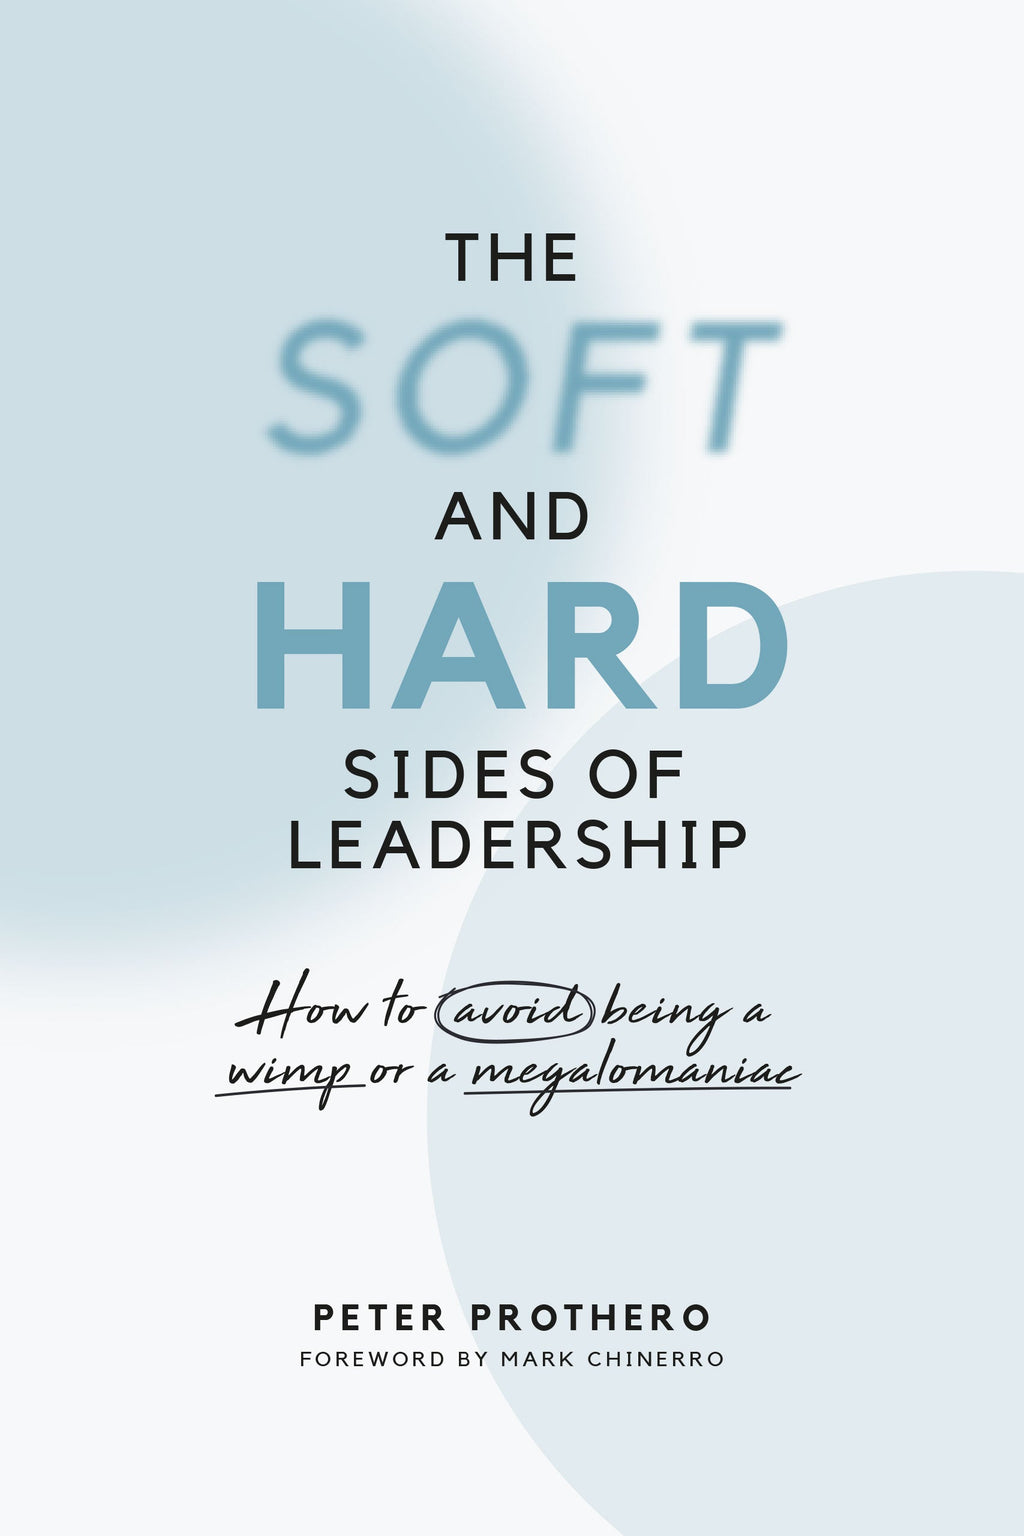 The Soft and Hard Sides of Leadership: How to Avoid Being a Wimp or Megalomaniac